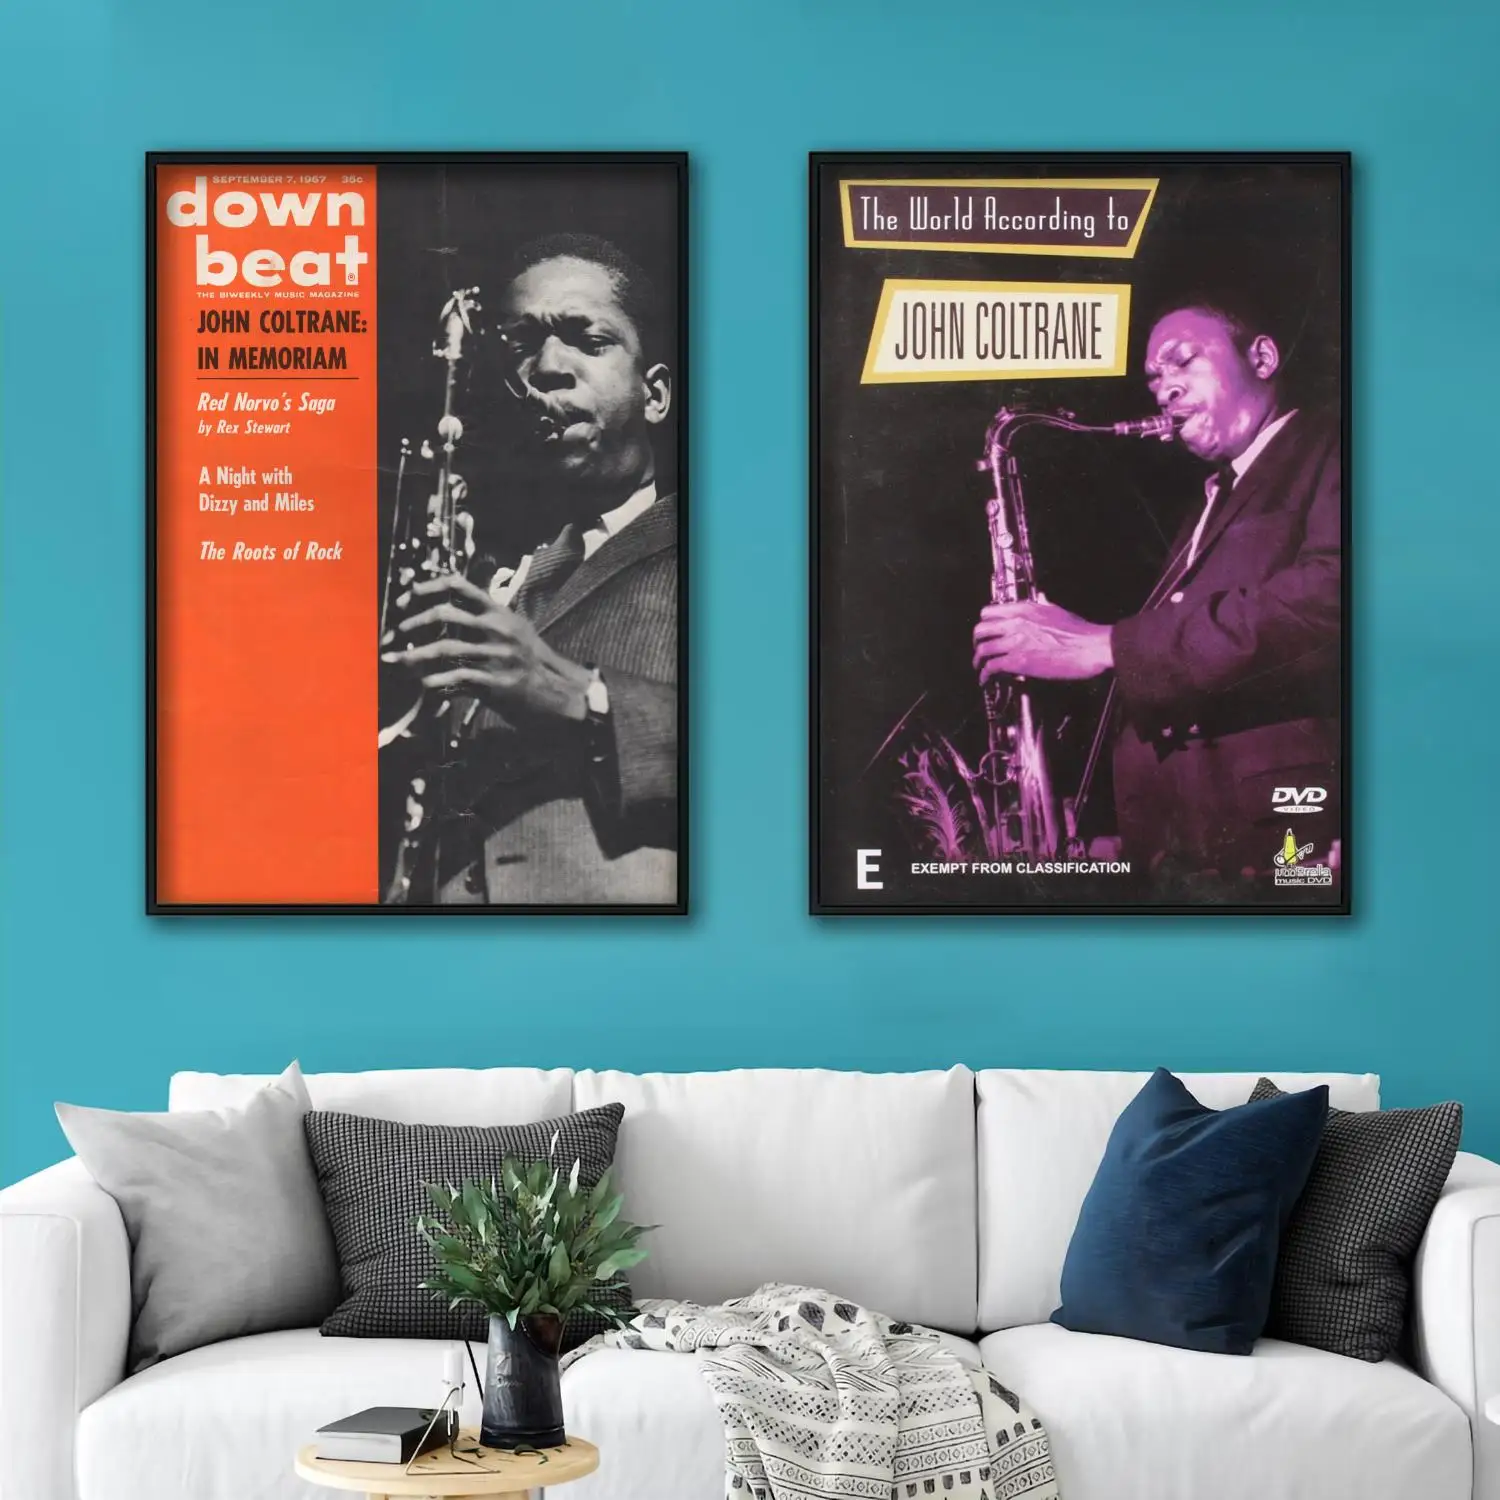 

john coltrane Composer Decorative Canvas Posters Room Bar Cafe Decor Gift Print Art Wall Paintings